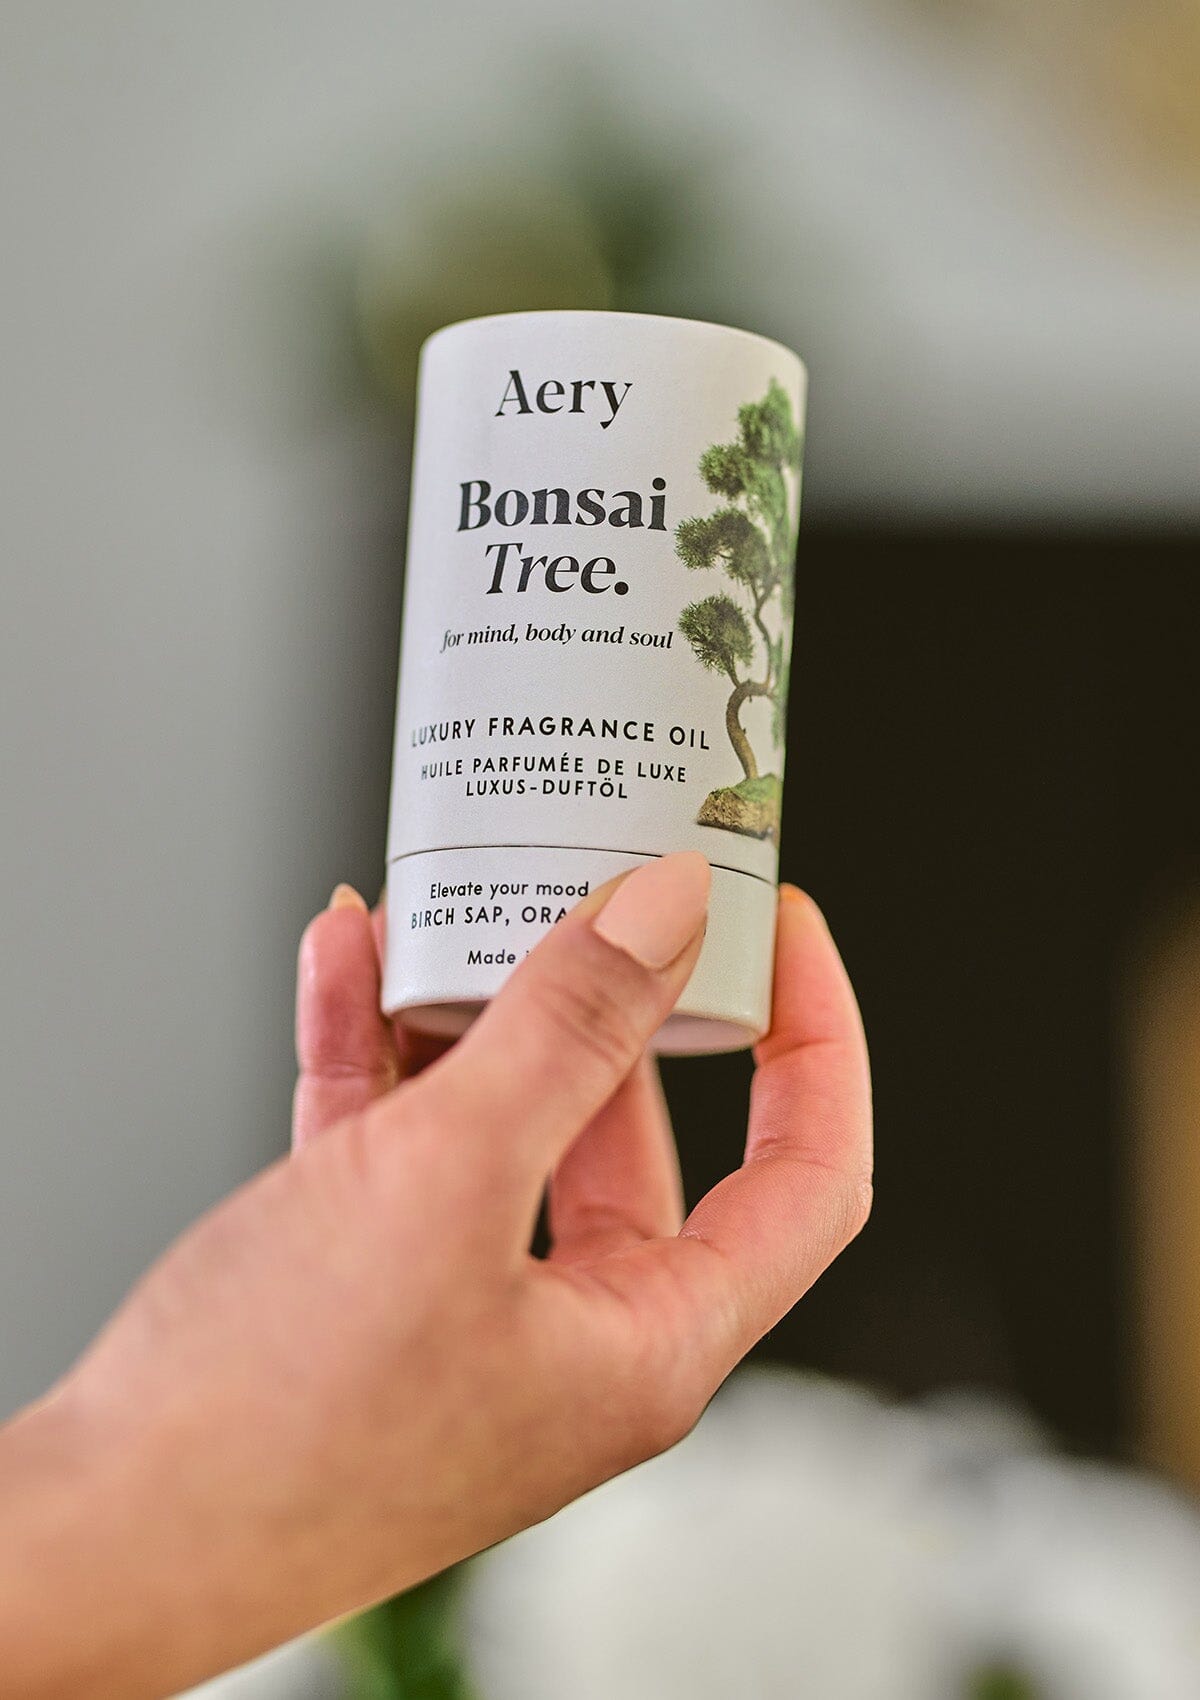 Bonsai Tree fragrance oil by Aery held in hand 